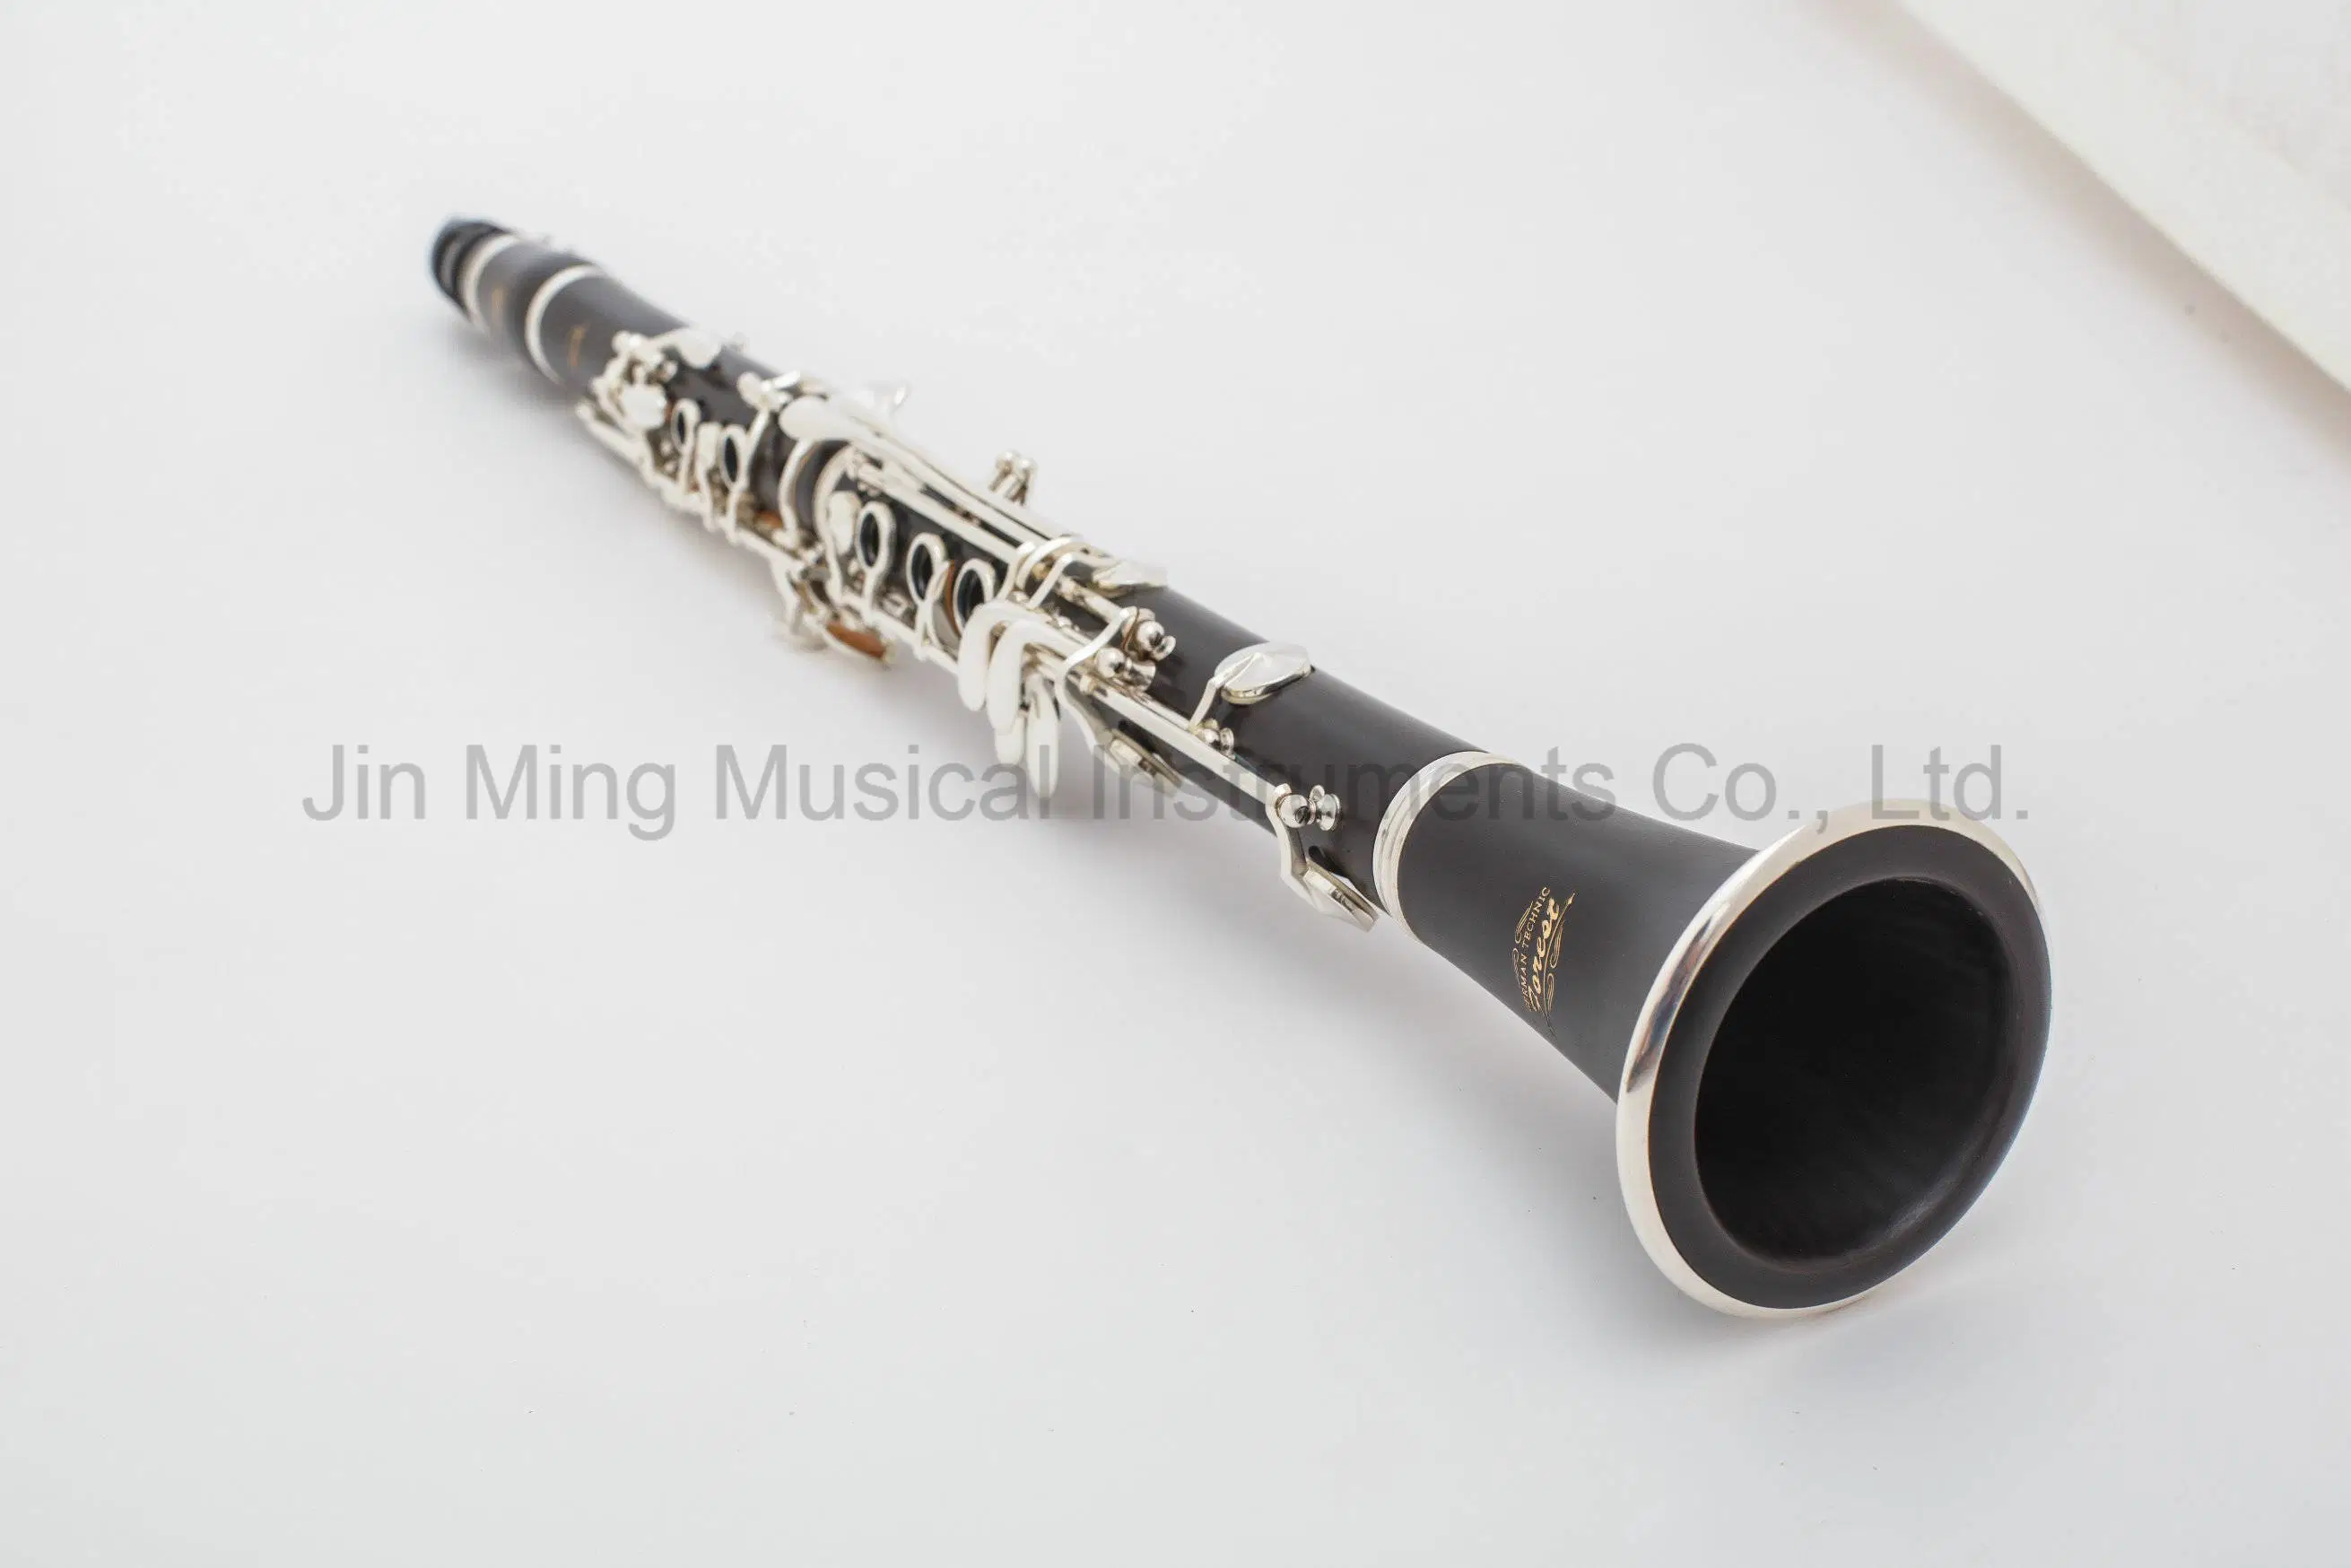 Synthetic Wood Body (ABS+60% ebony powder) Greenline Clarinet Manufacturer